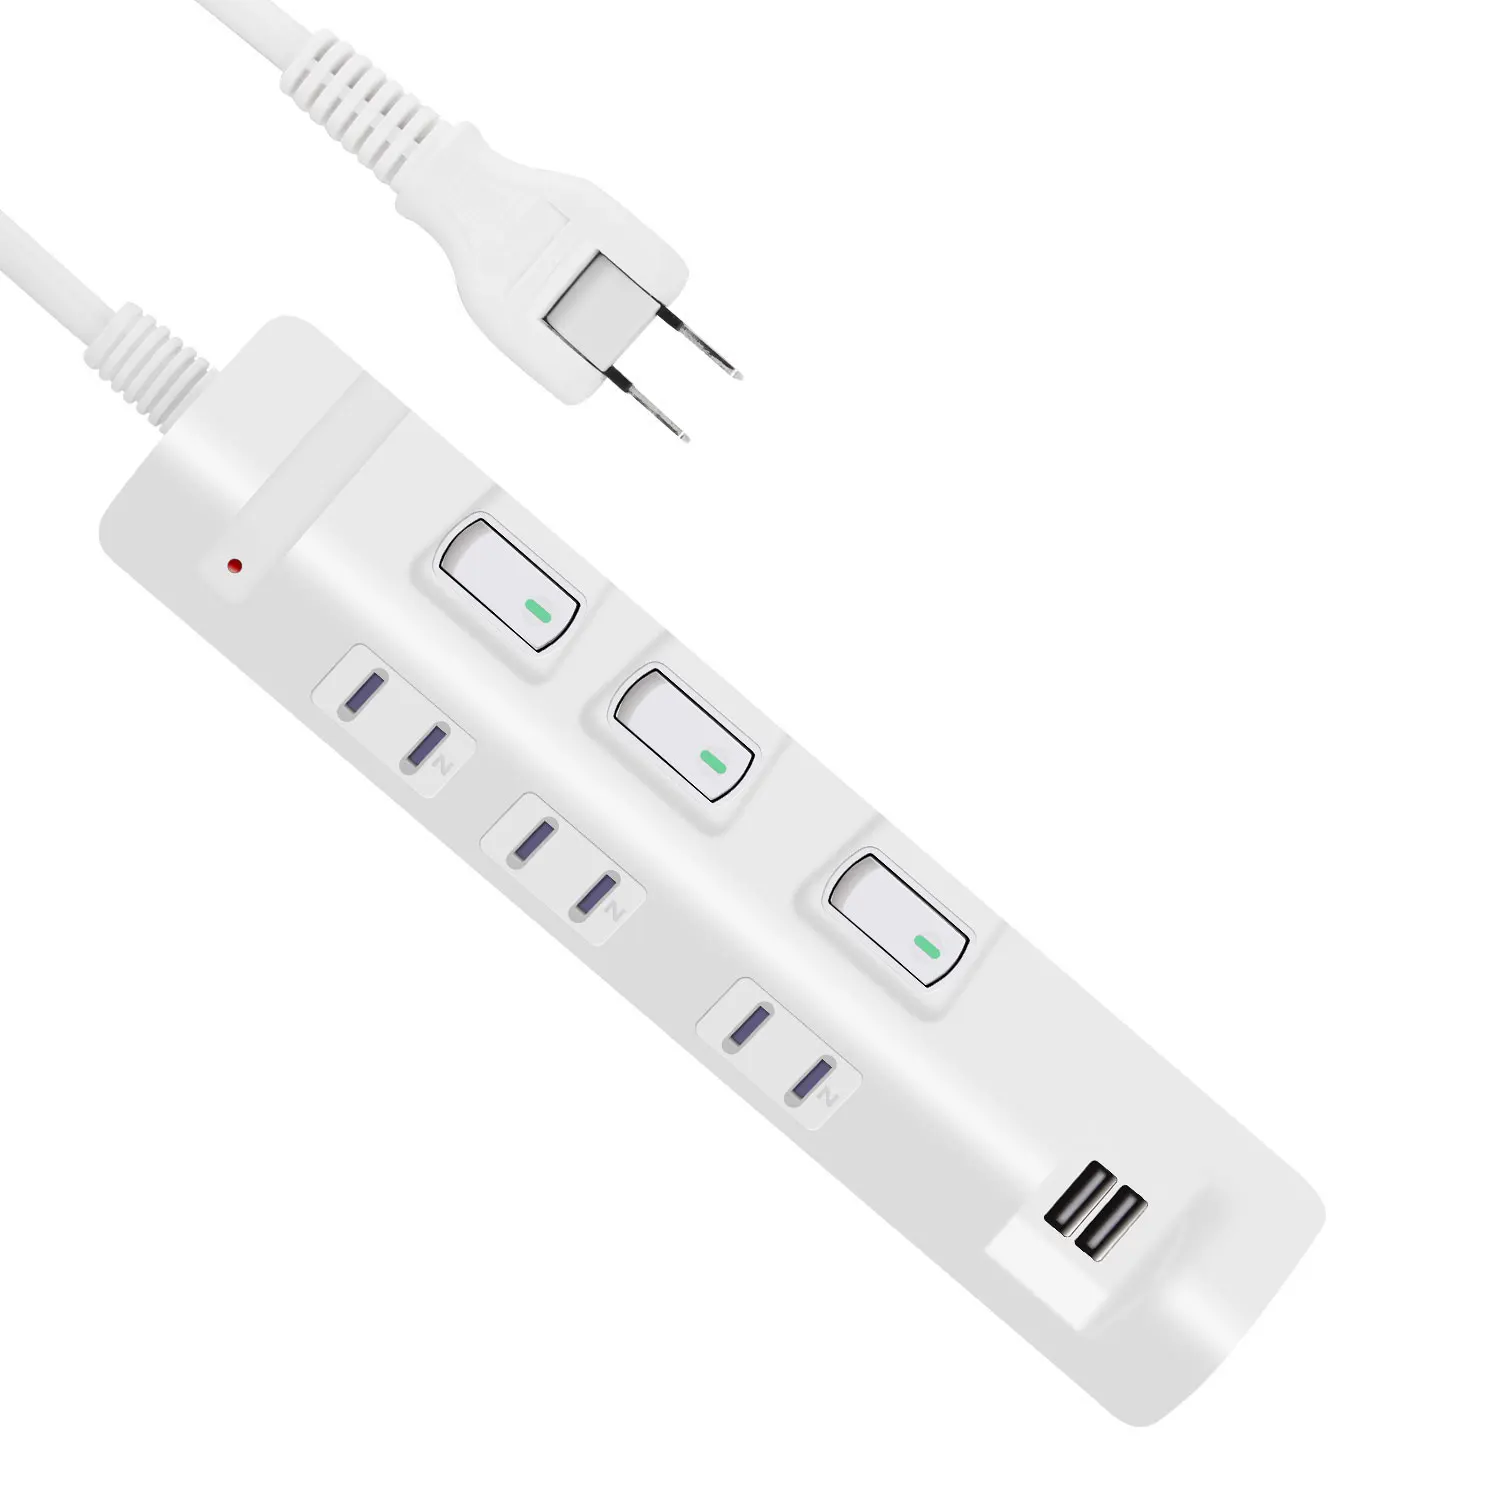 Japan Style Home use lightning protection USB Electrical  power strip extension power bar